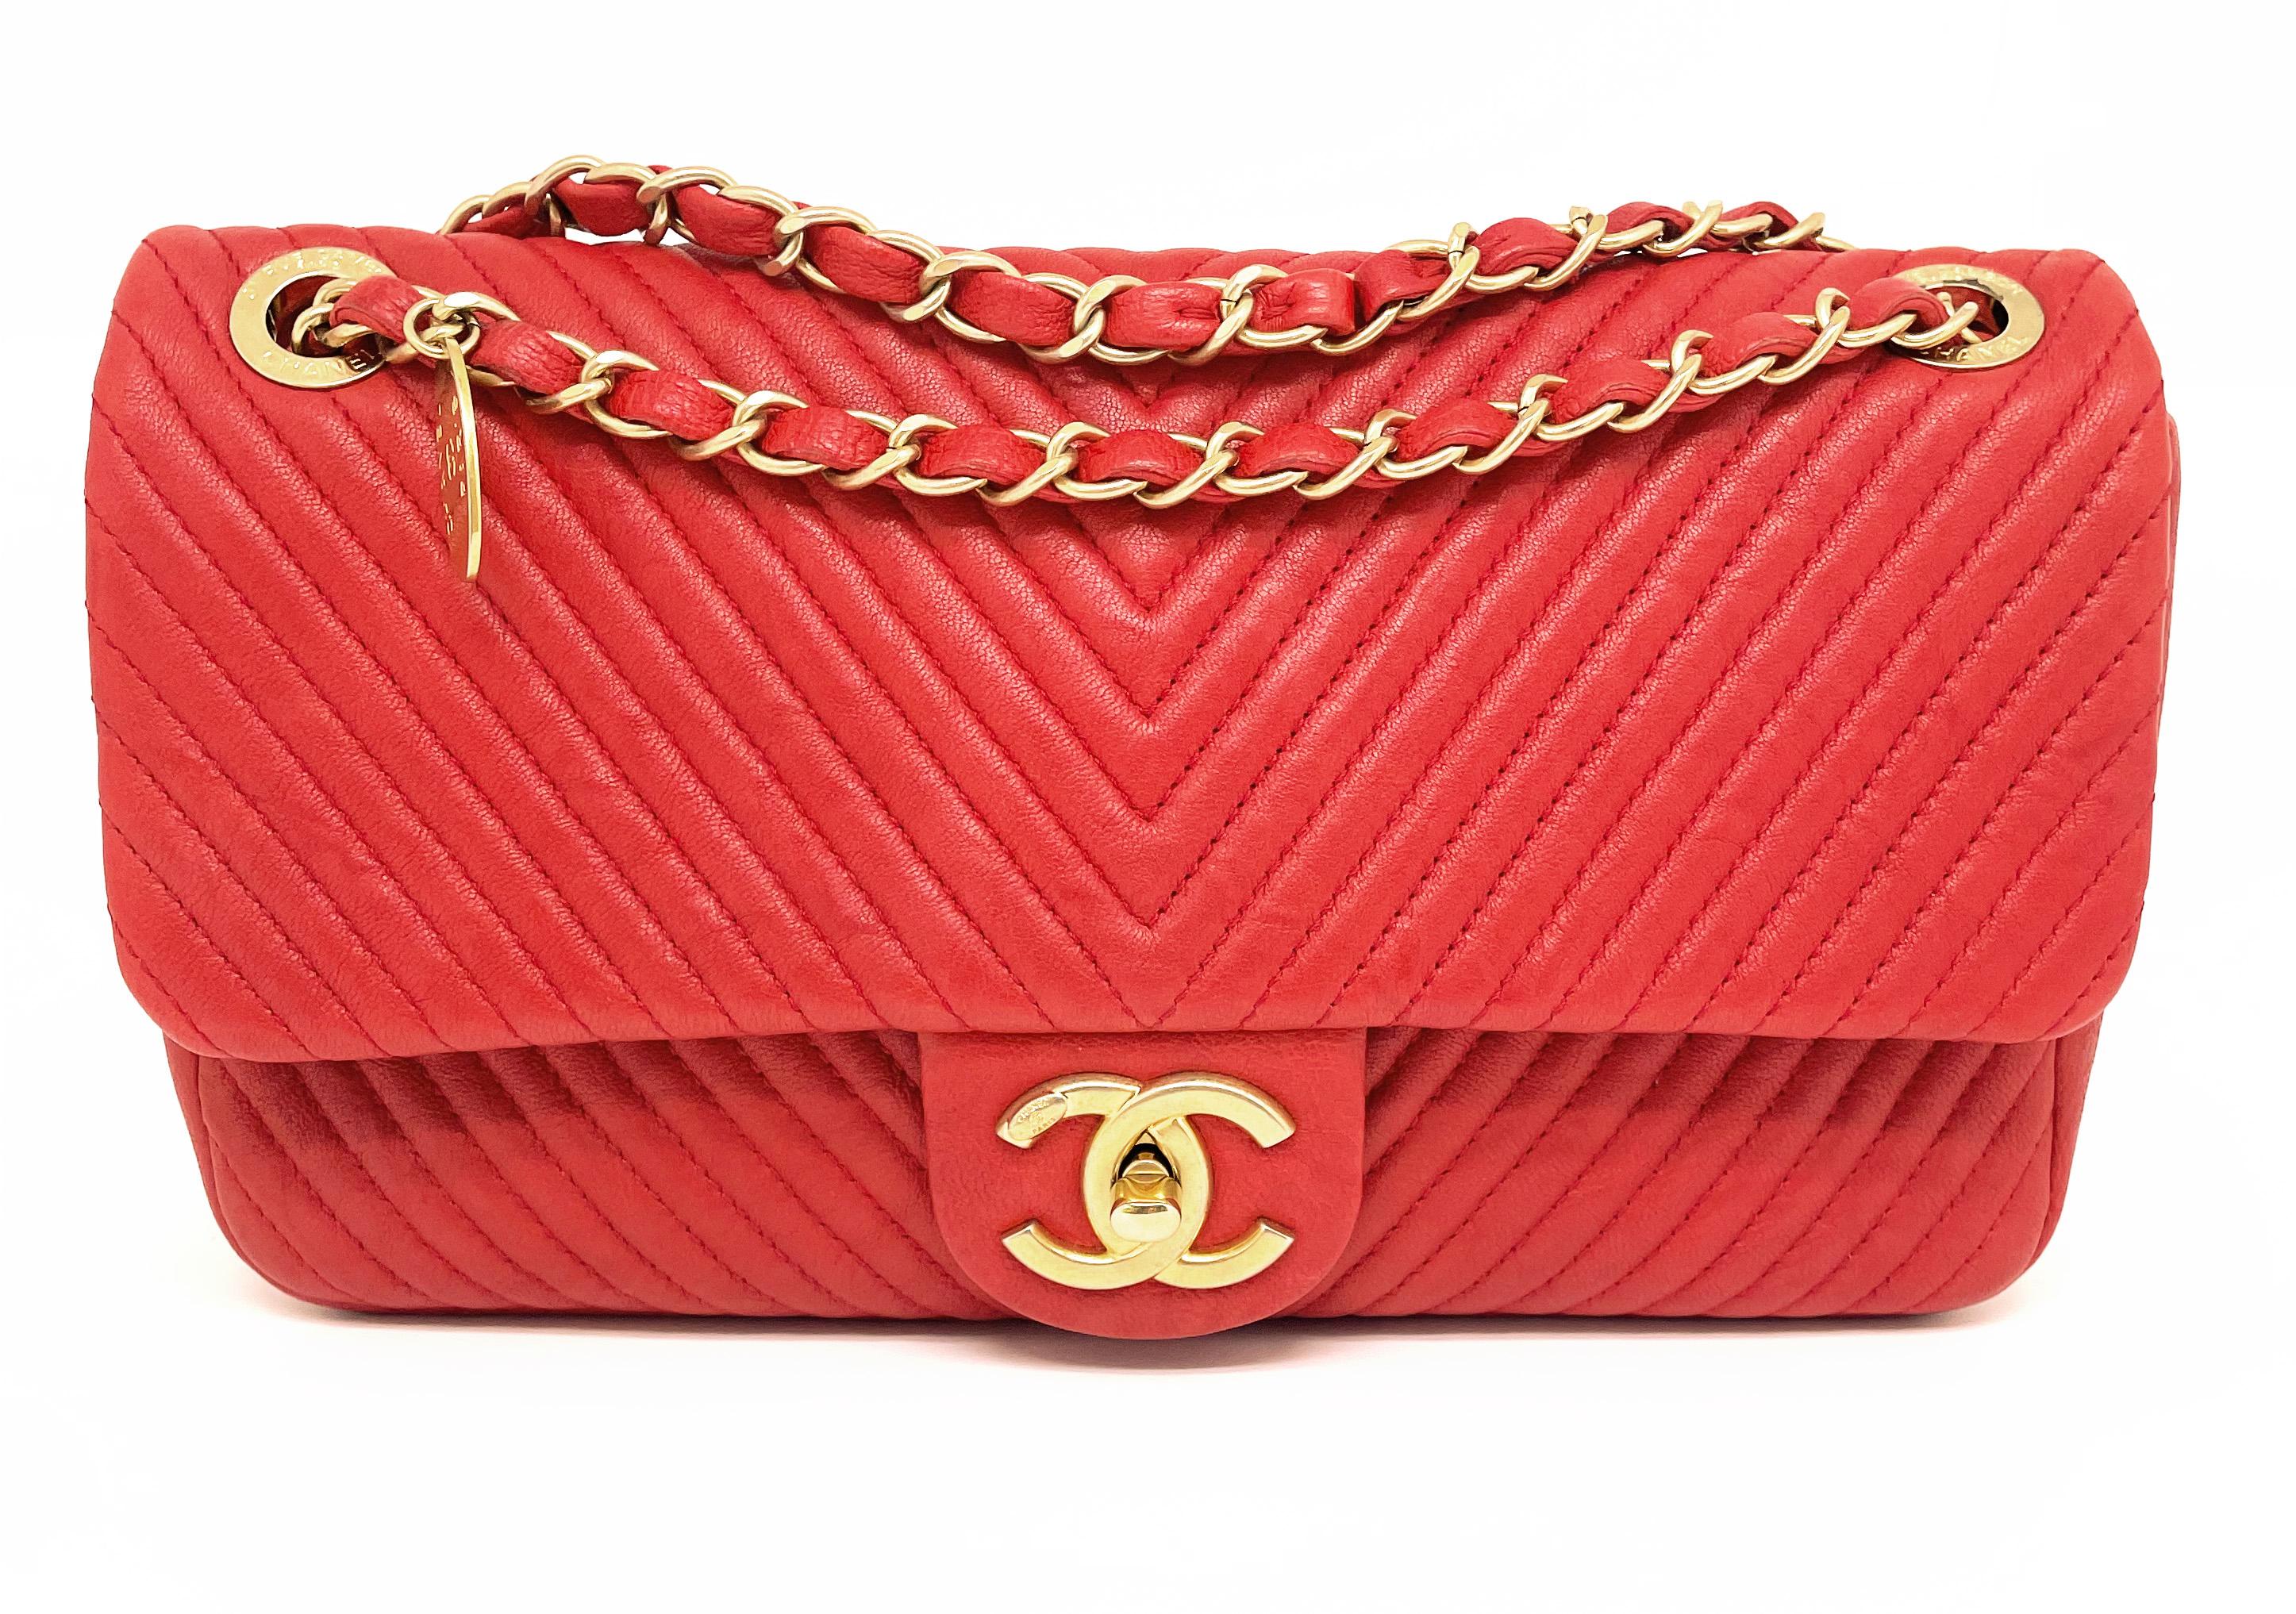 Superb Chanel 27 cm bag in leather and Valentine Red Chevron pattern.
Practical with its simple interior flap in black fabric.
One zipped pocket for even more security.
This bag has a golden chain interwoven with leather.
The bag can be worn on the